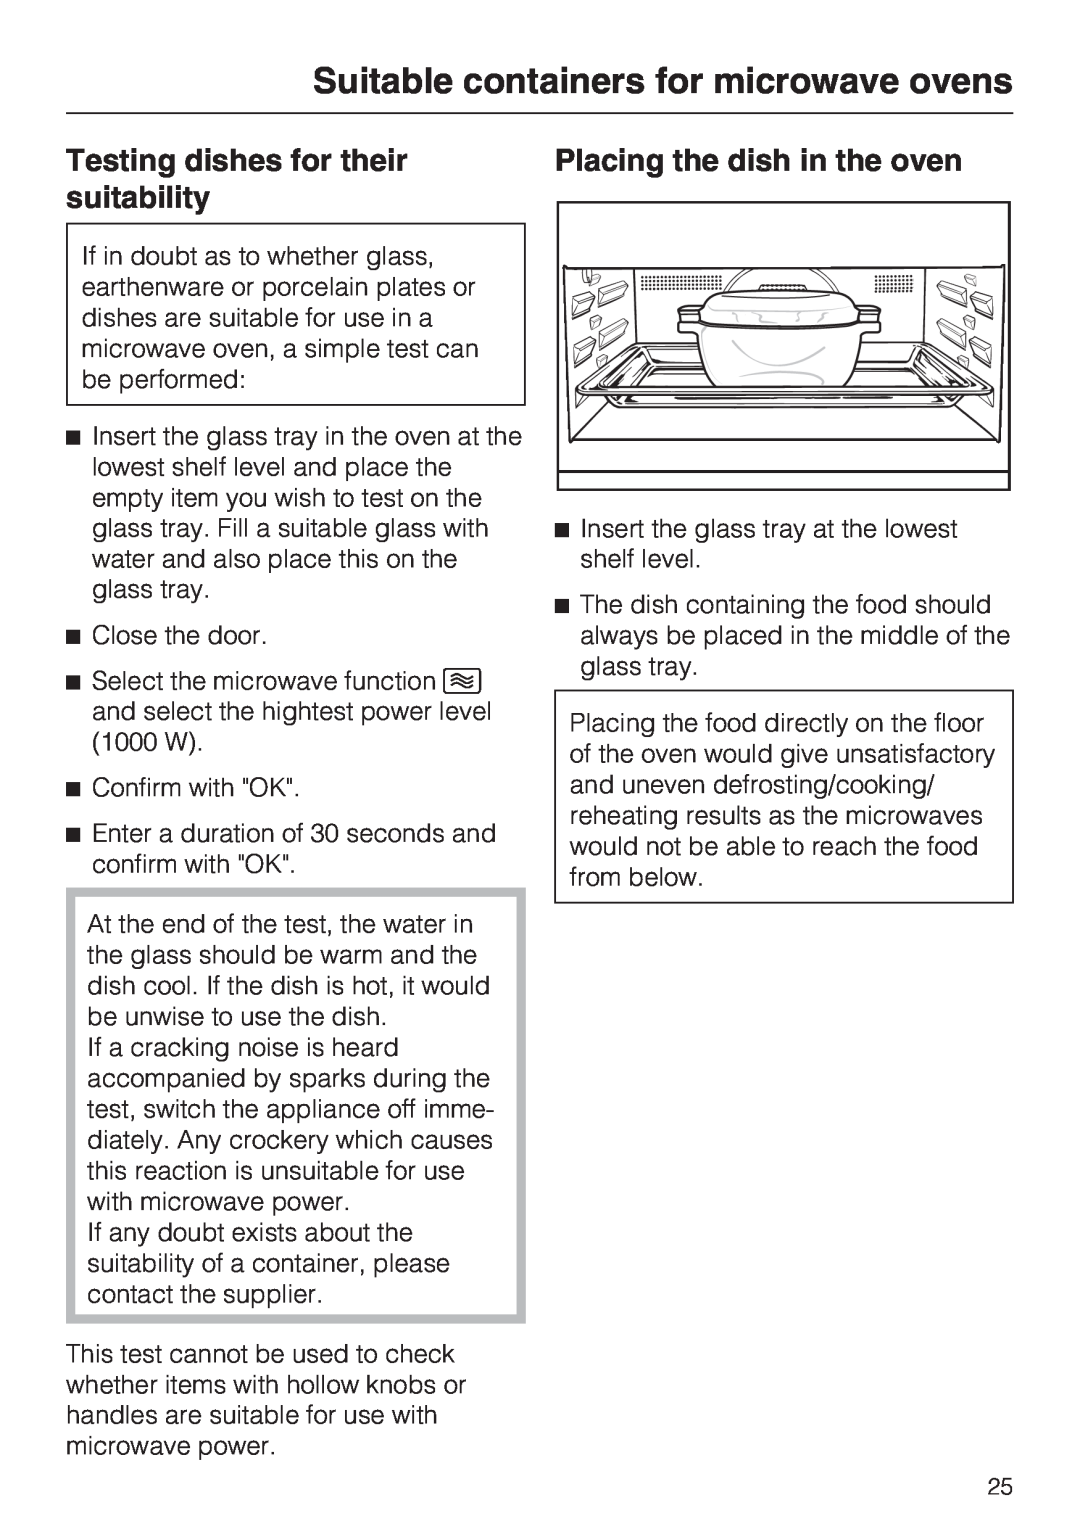 Miele H 5030 BM, H 5040 BM installation instructions Testing dishes for their, Placing the dish in the oven, suitability 